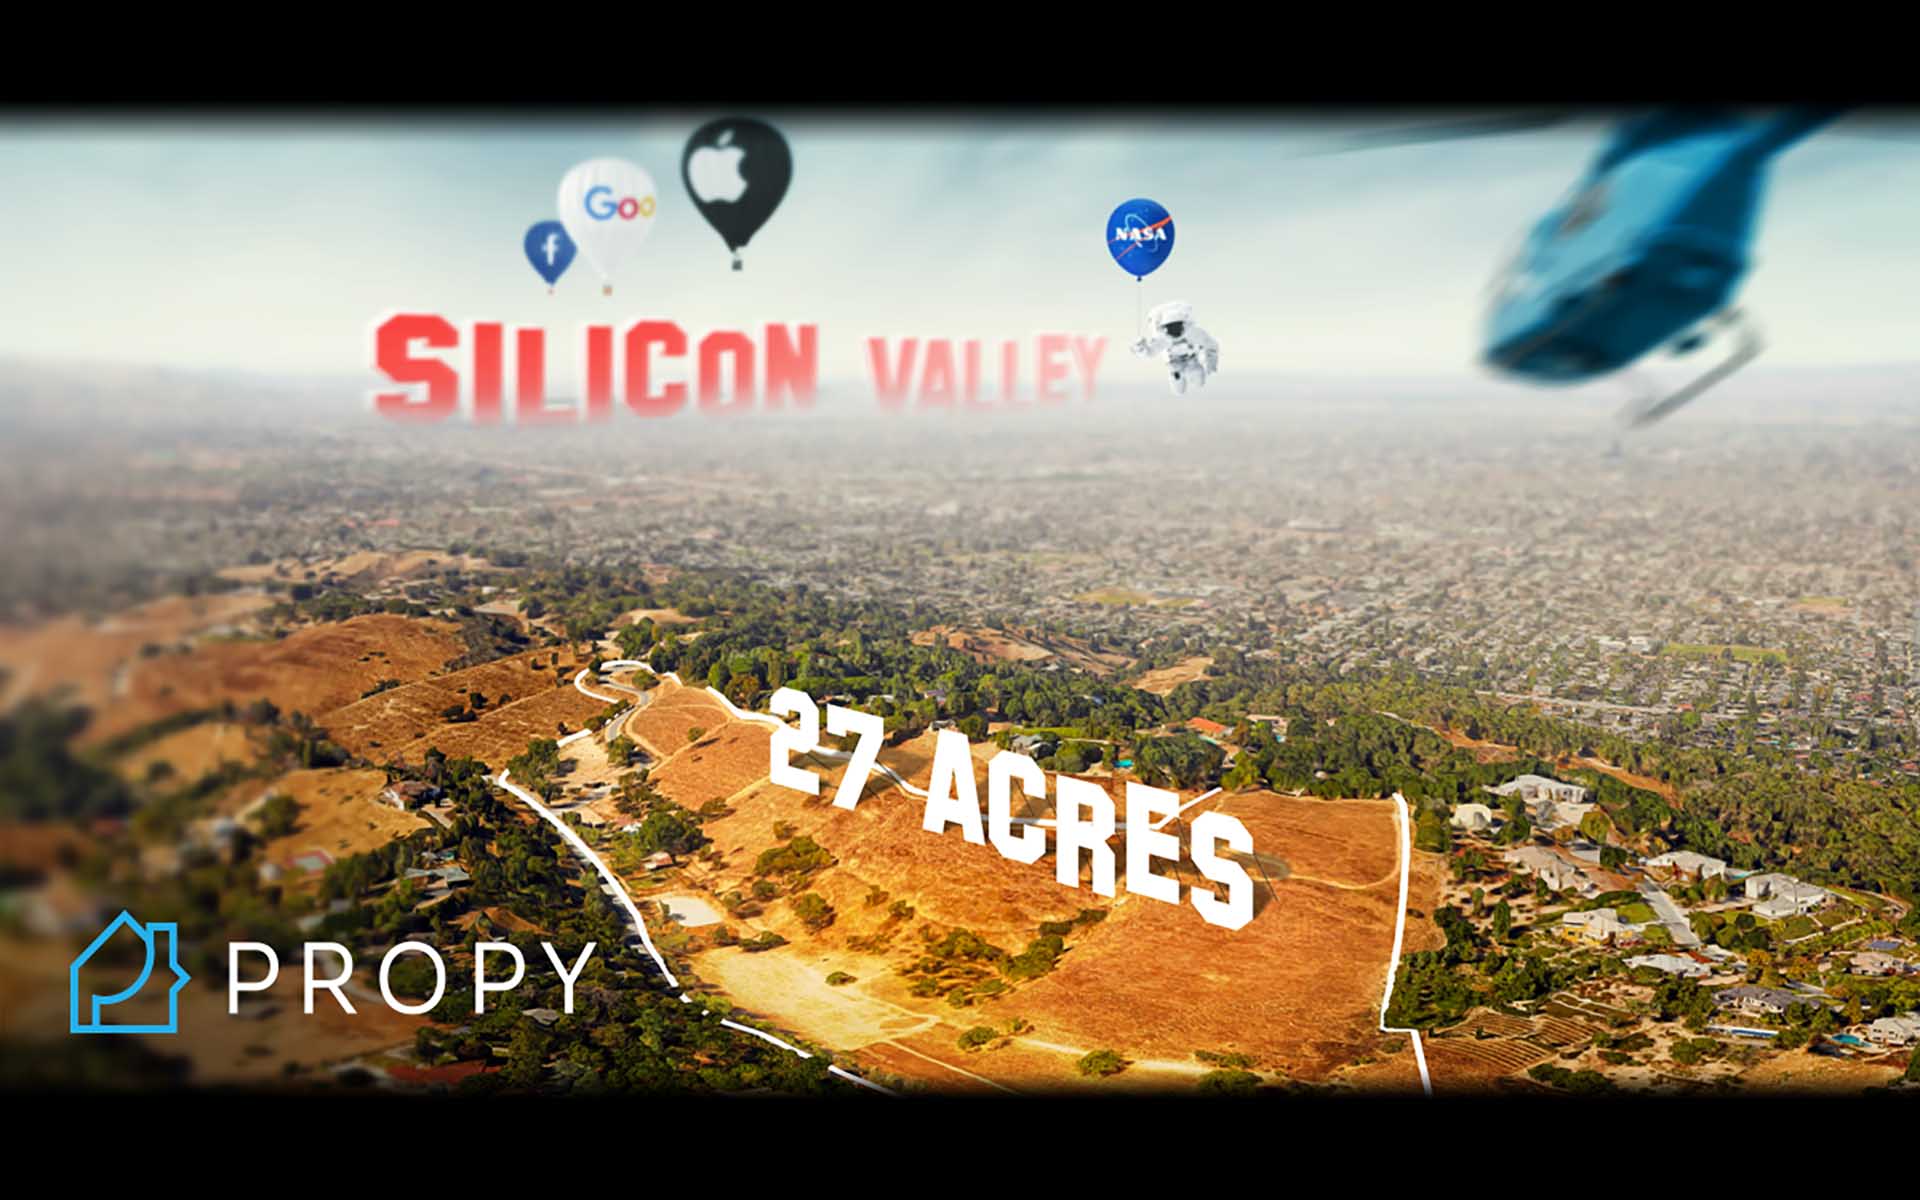 One of the Largest Pieces of City Land in Silicon Valley up for Sale in BTC, ETH, XRP and USD